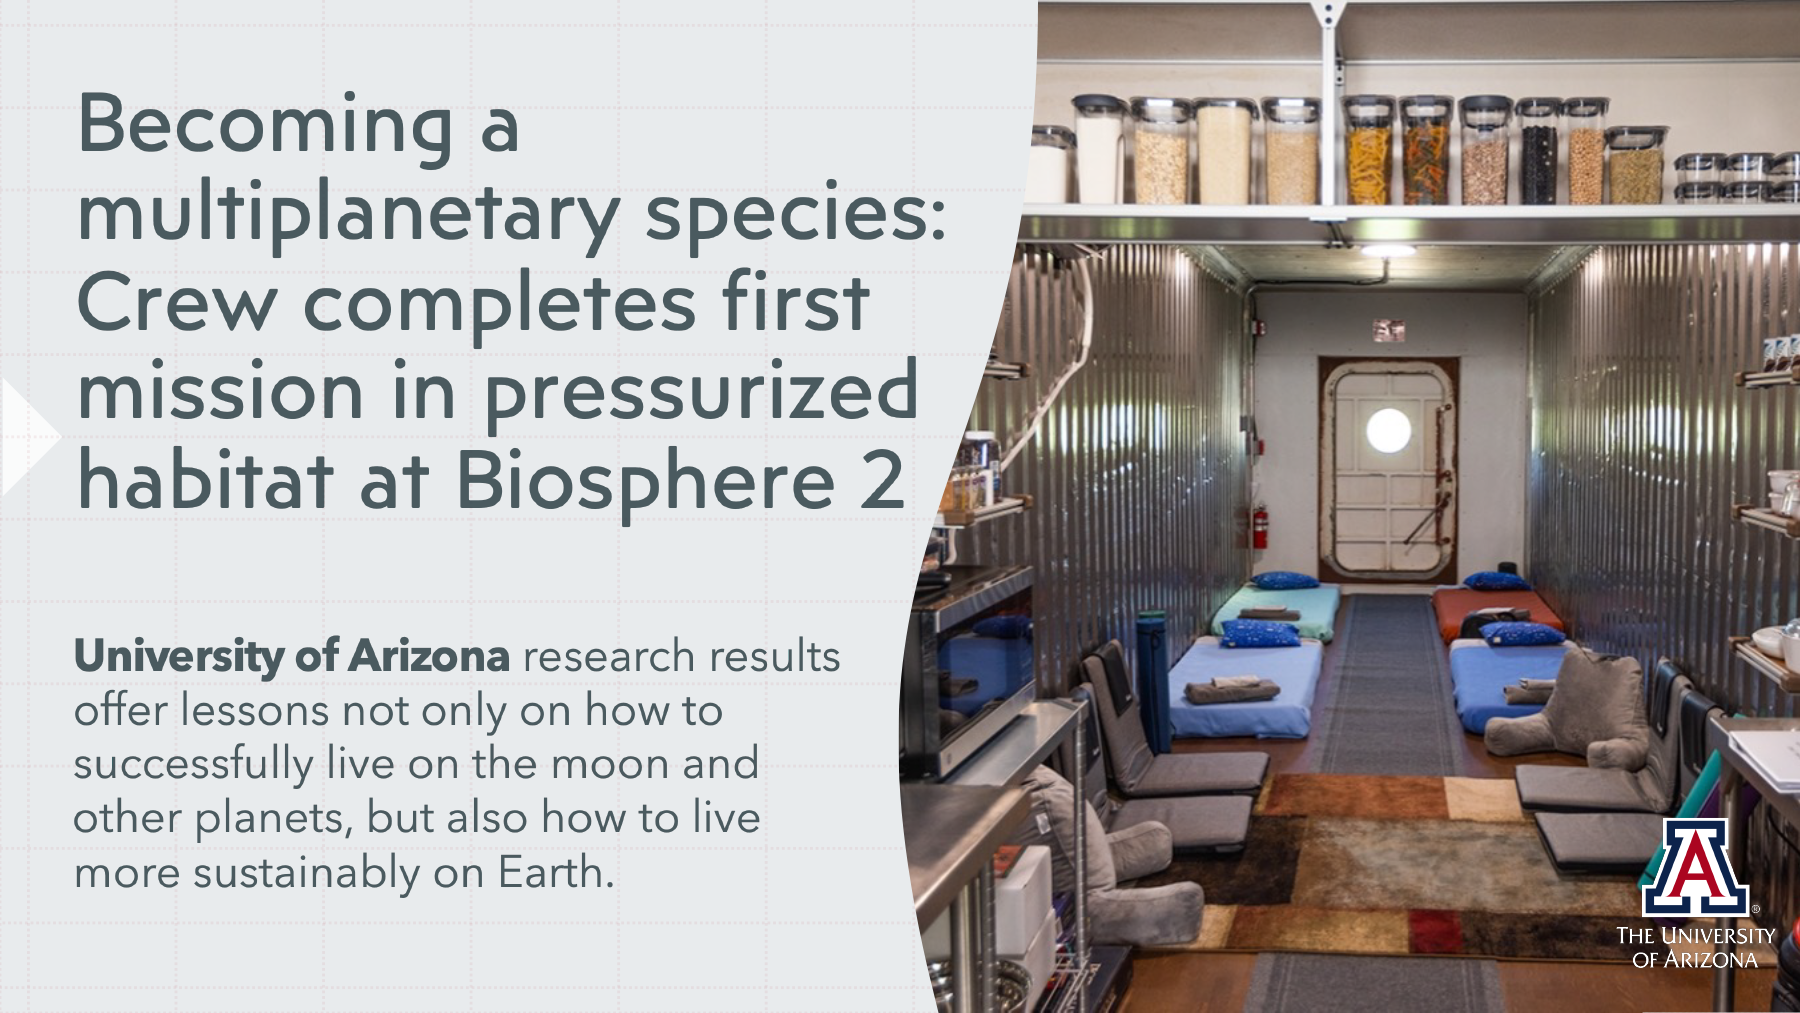 Crew completes first mission in pressurized habitat at Biosphere 2